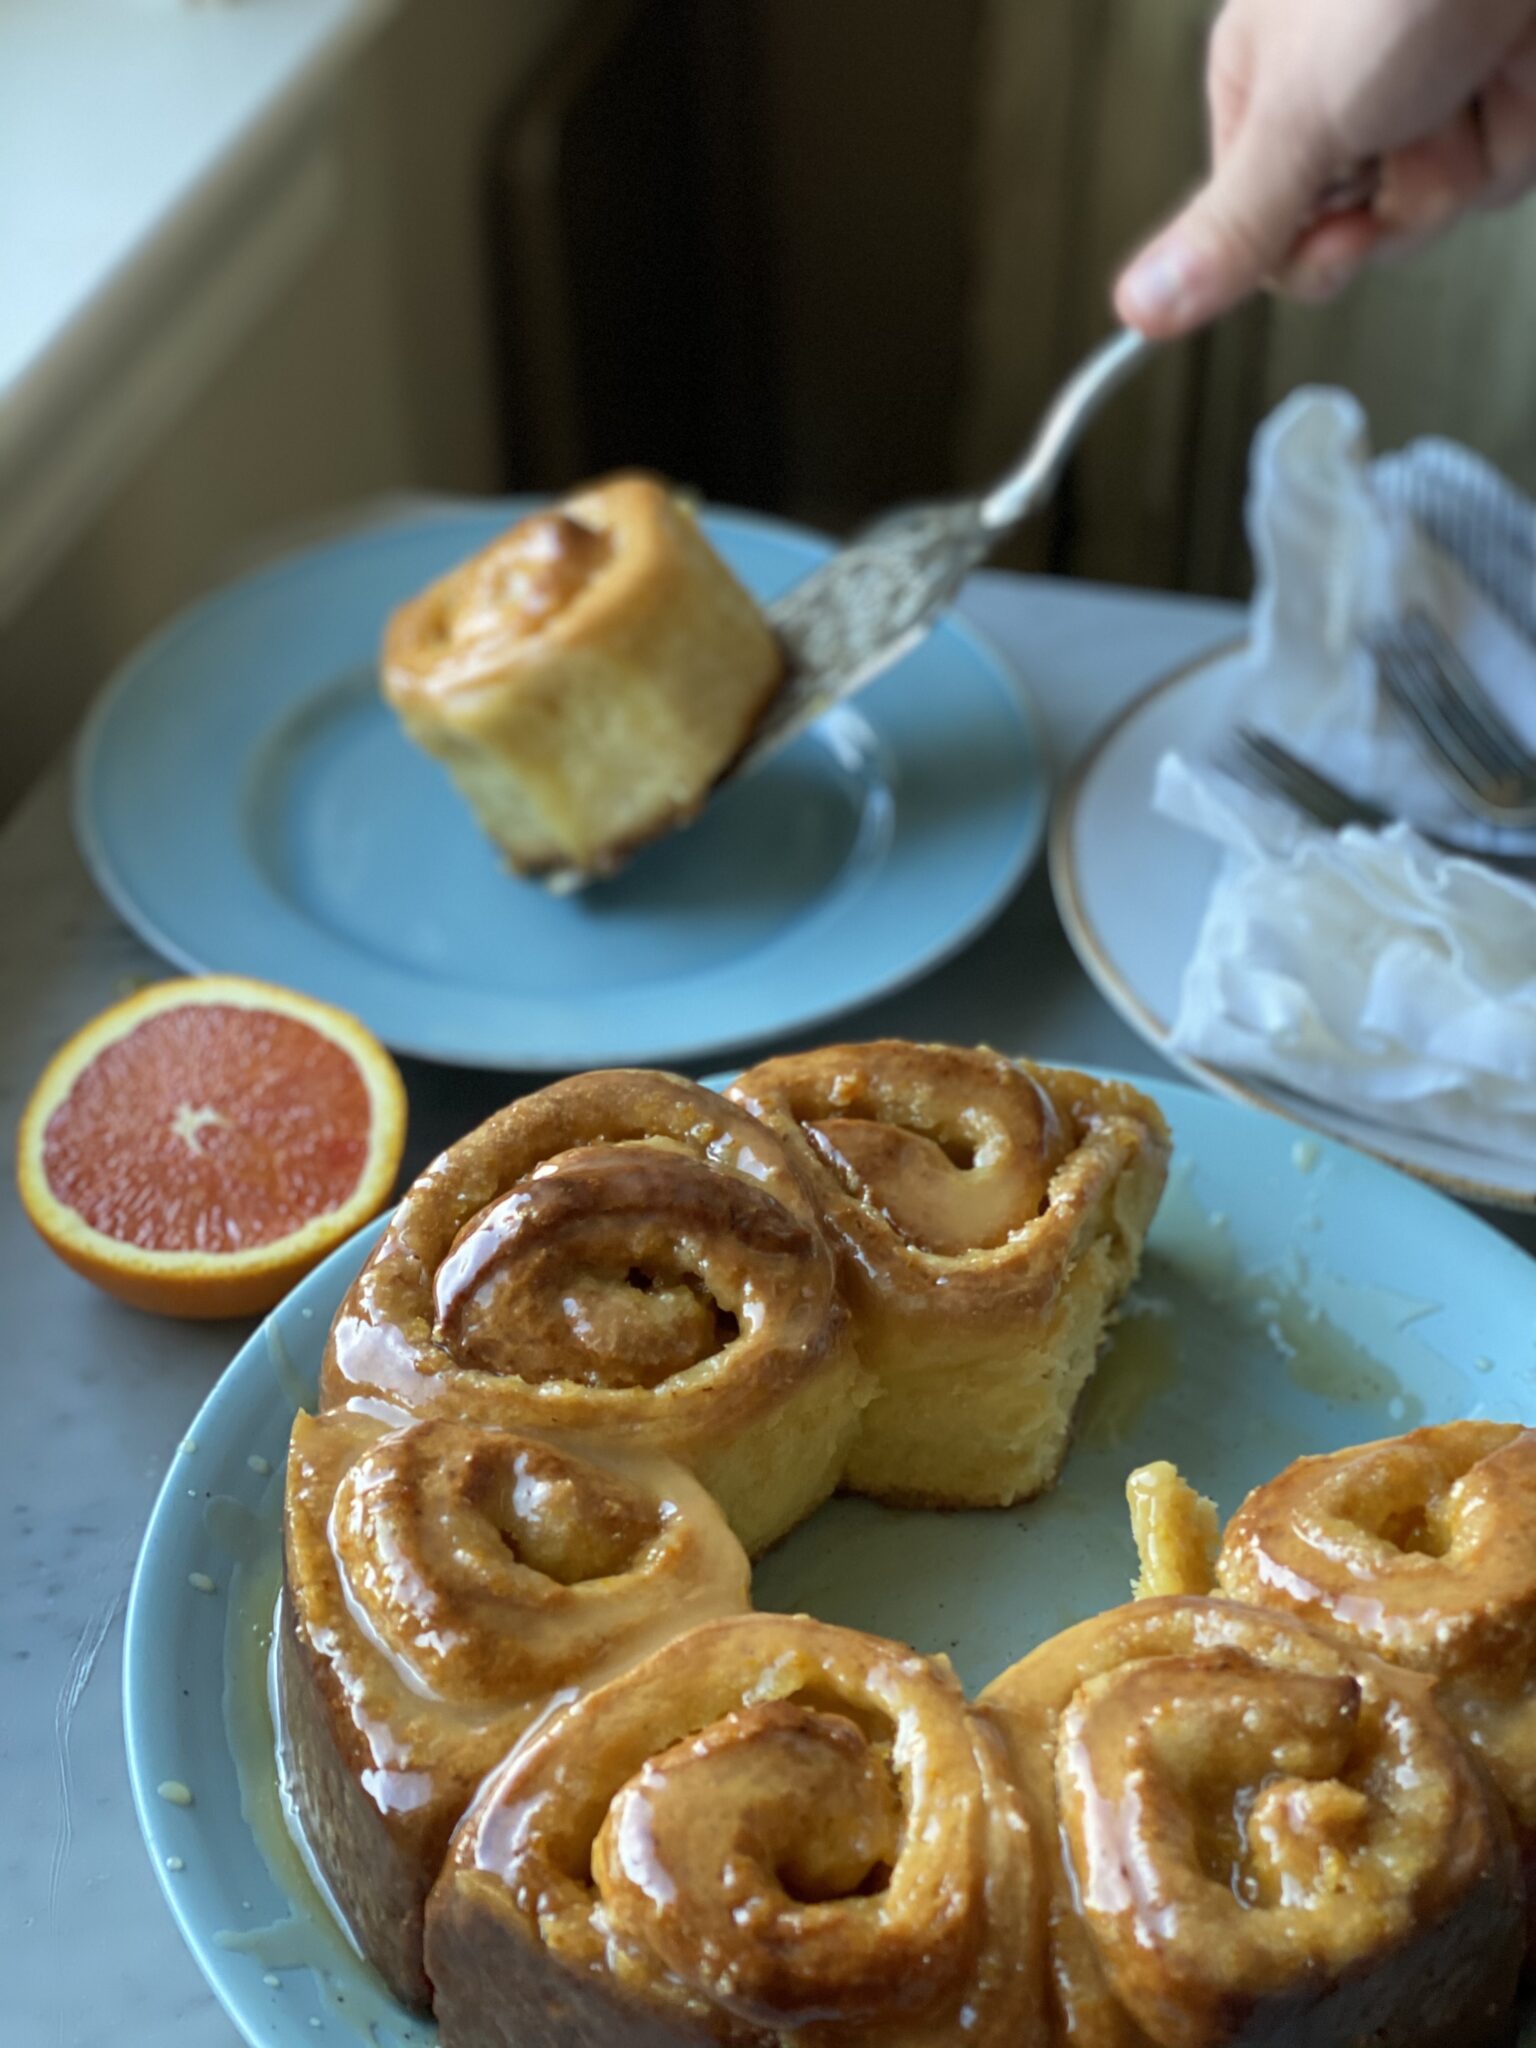 A roll being served and a plate of orange rolls and a half of orange